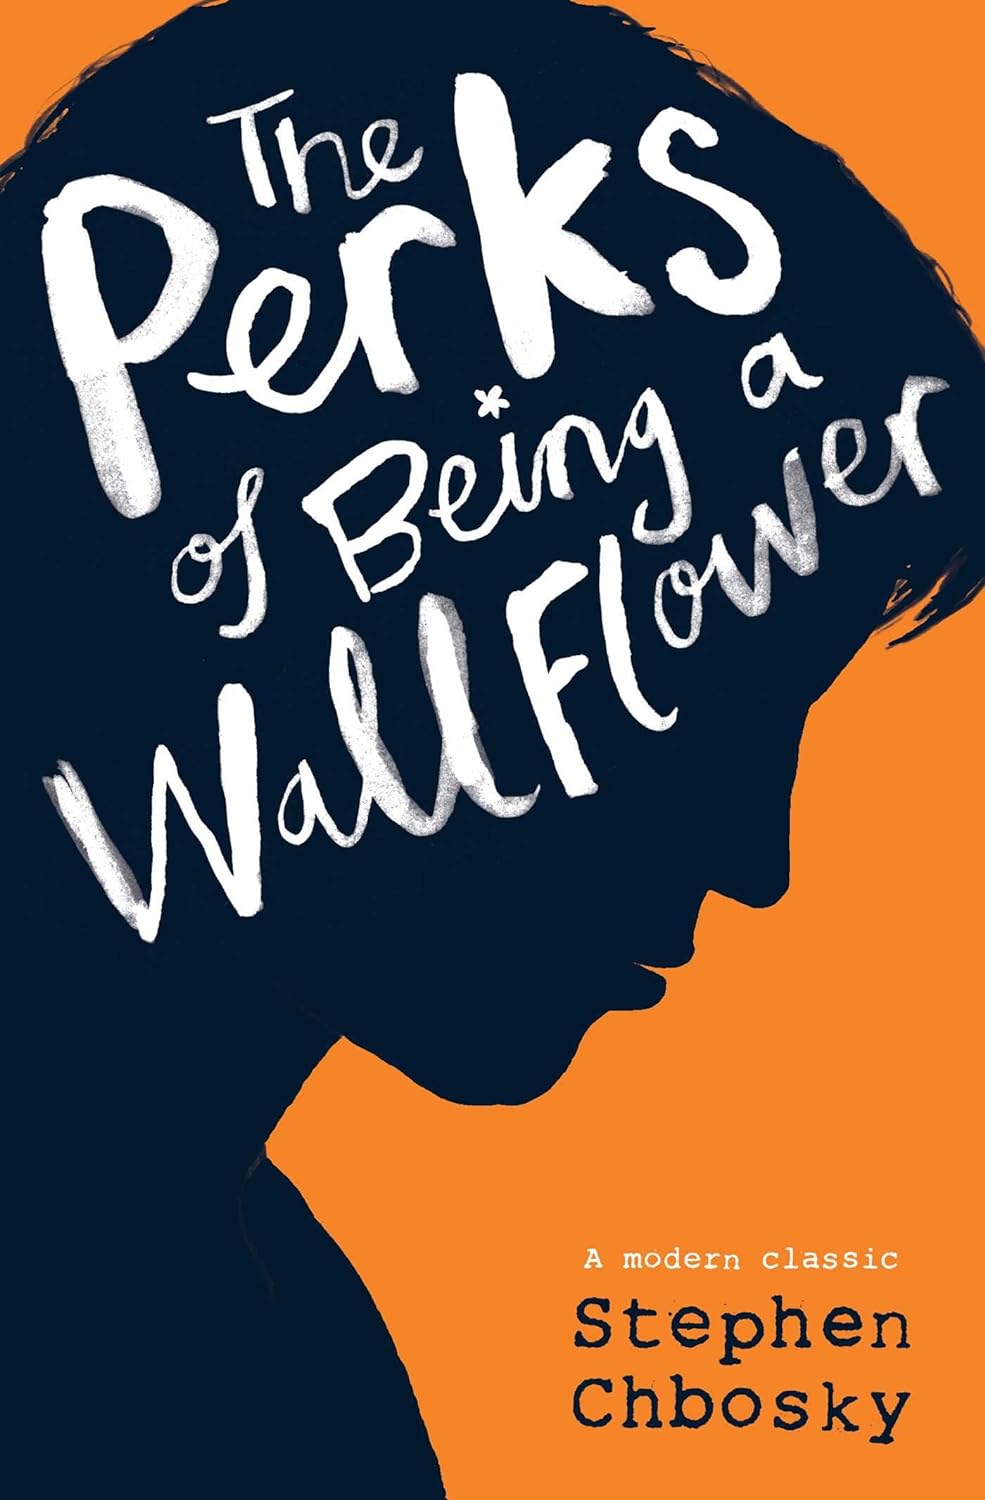 Stephen Chbosky: The Perks of Being a Wallflower 